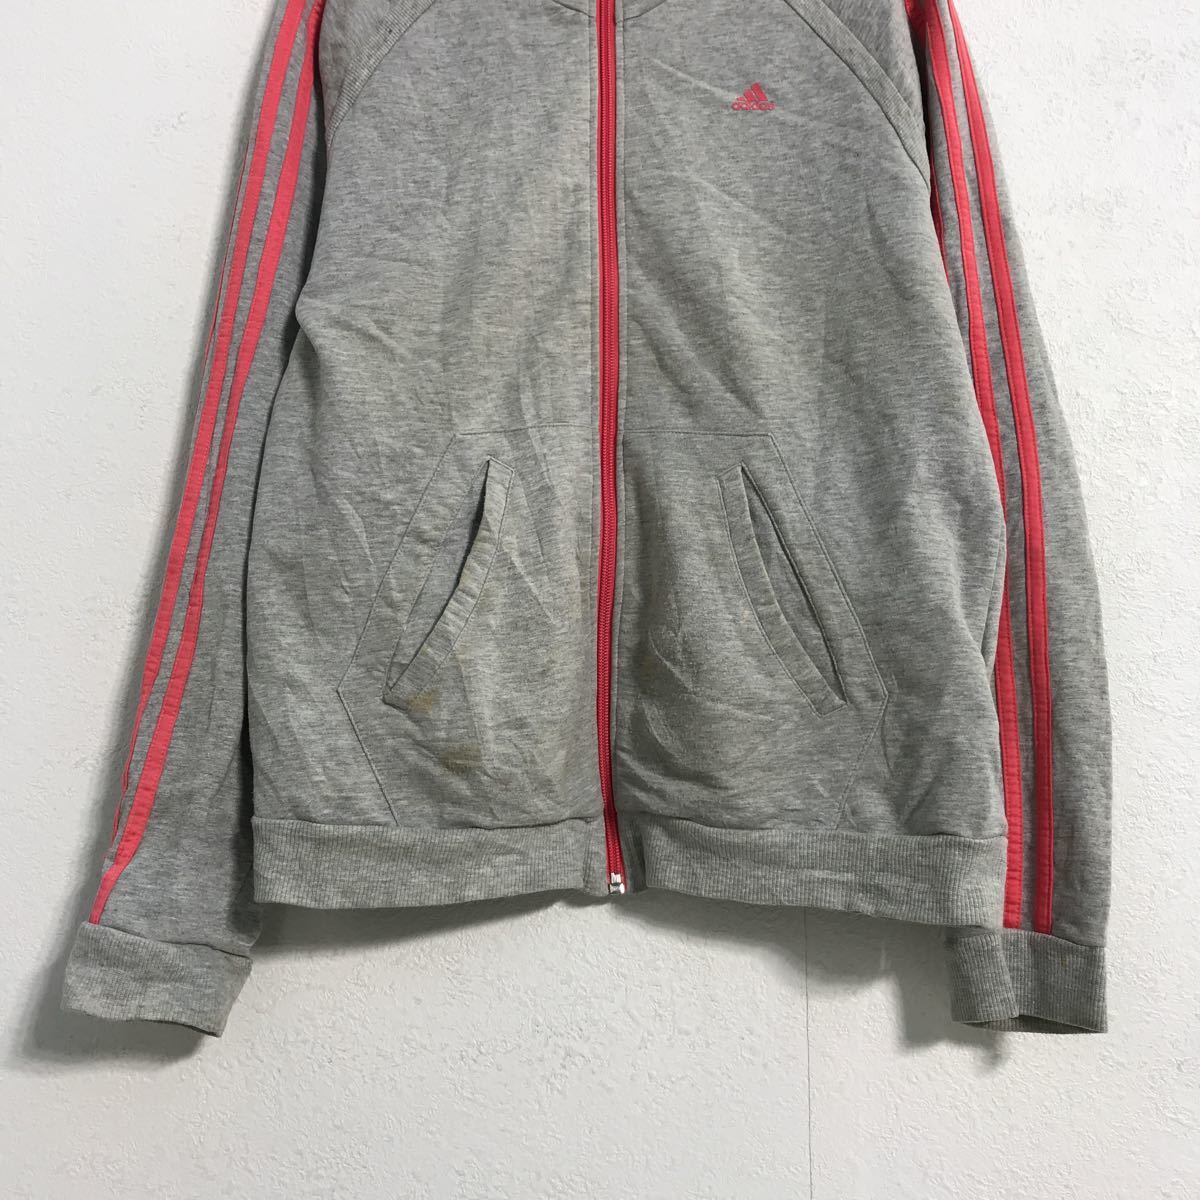 adidas Logo sweat sweatshirt lady's L gray pink Adidas Zip up old clothes . America buying up a508-6294